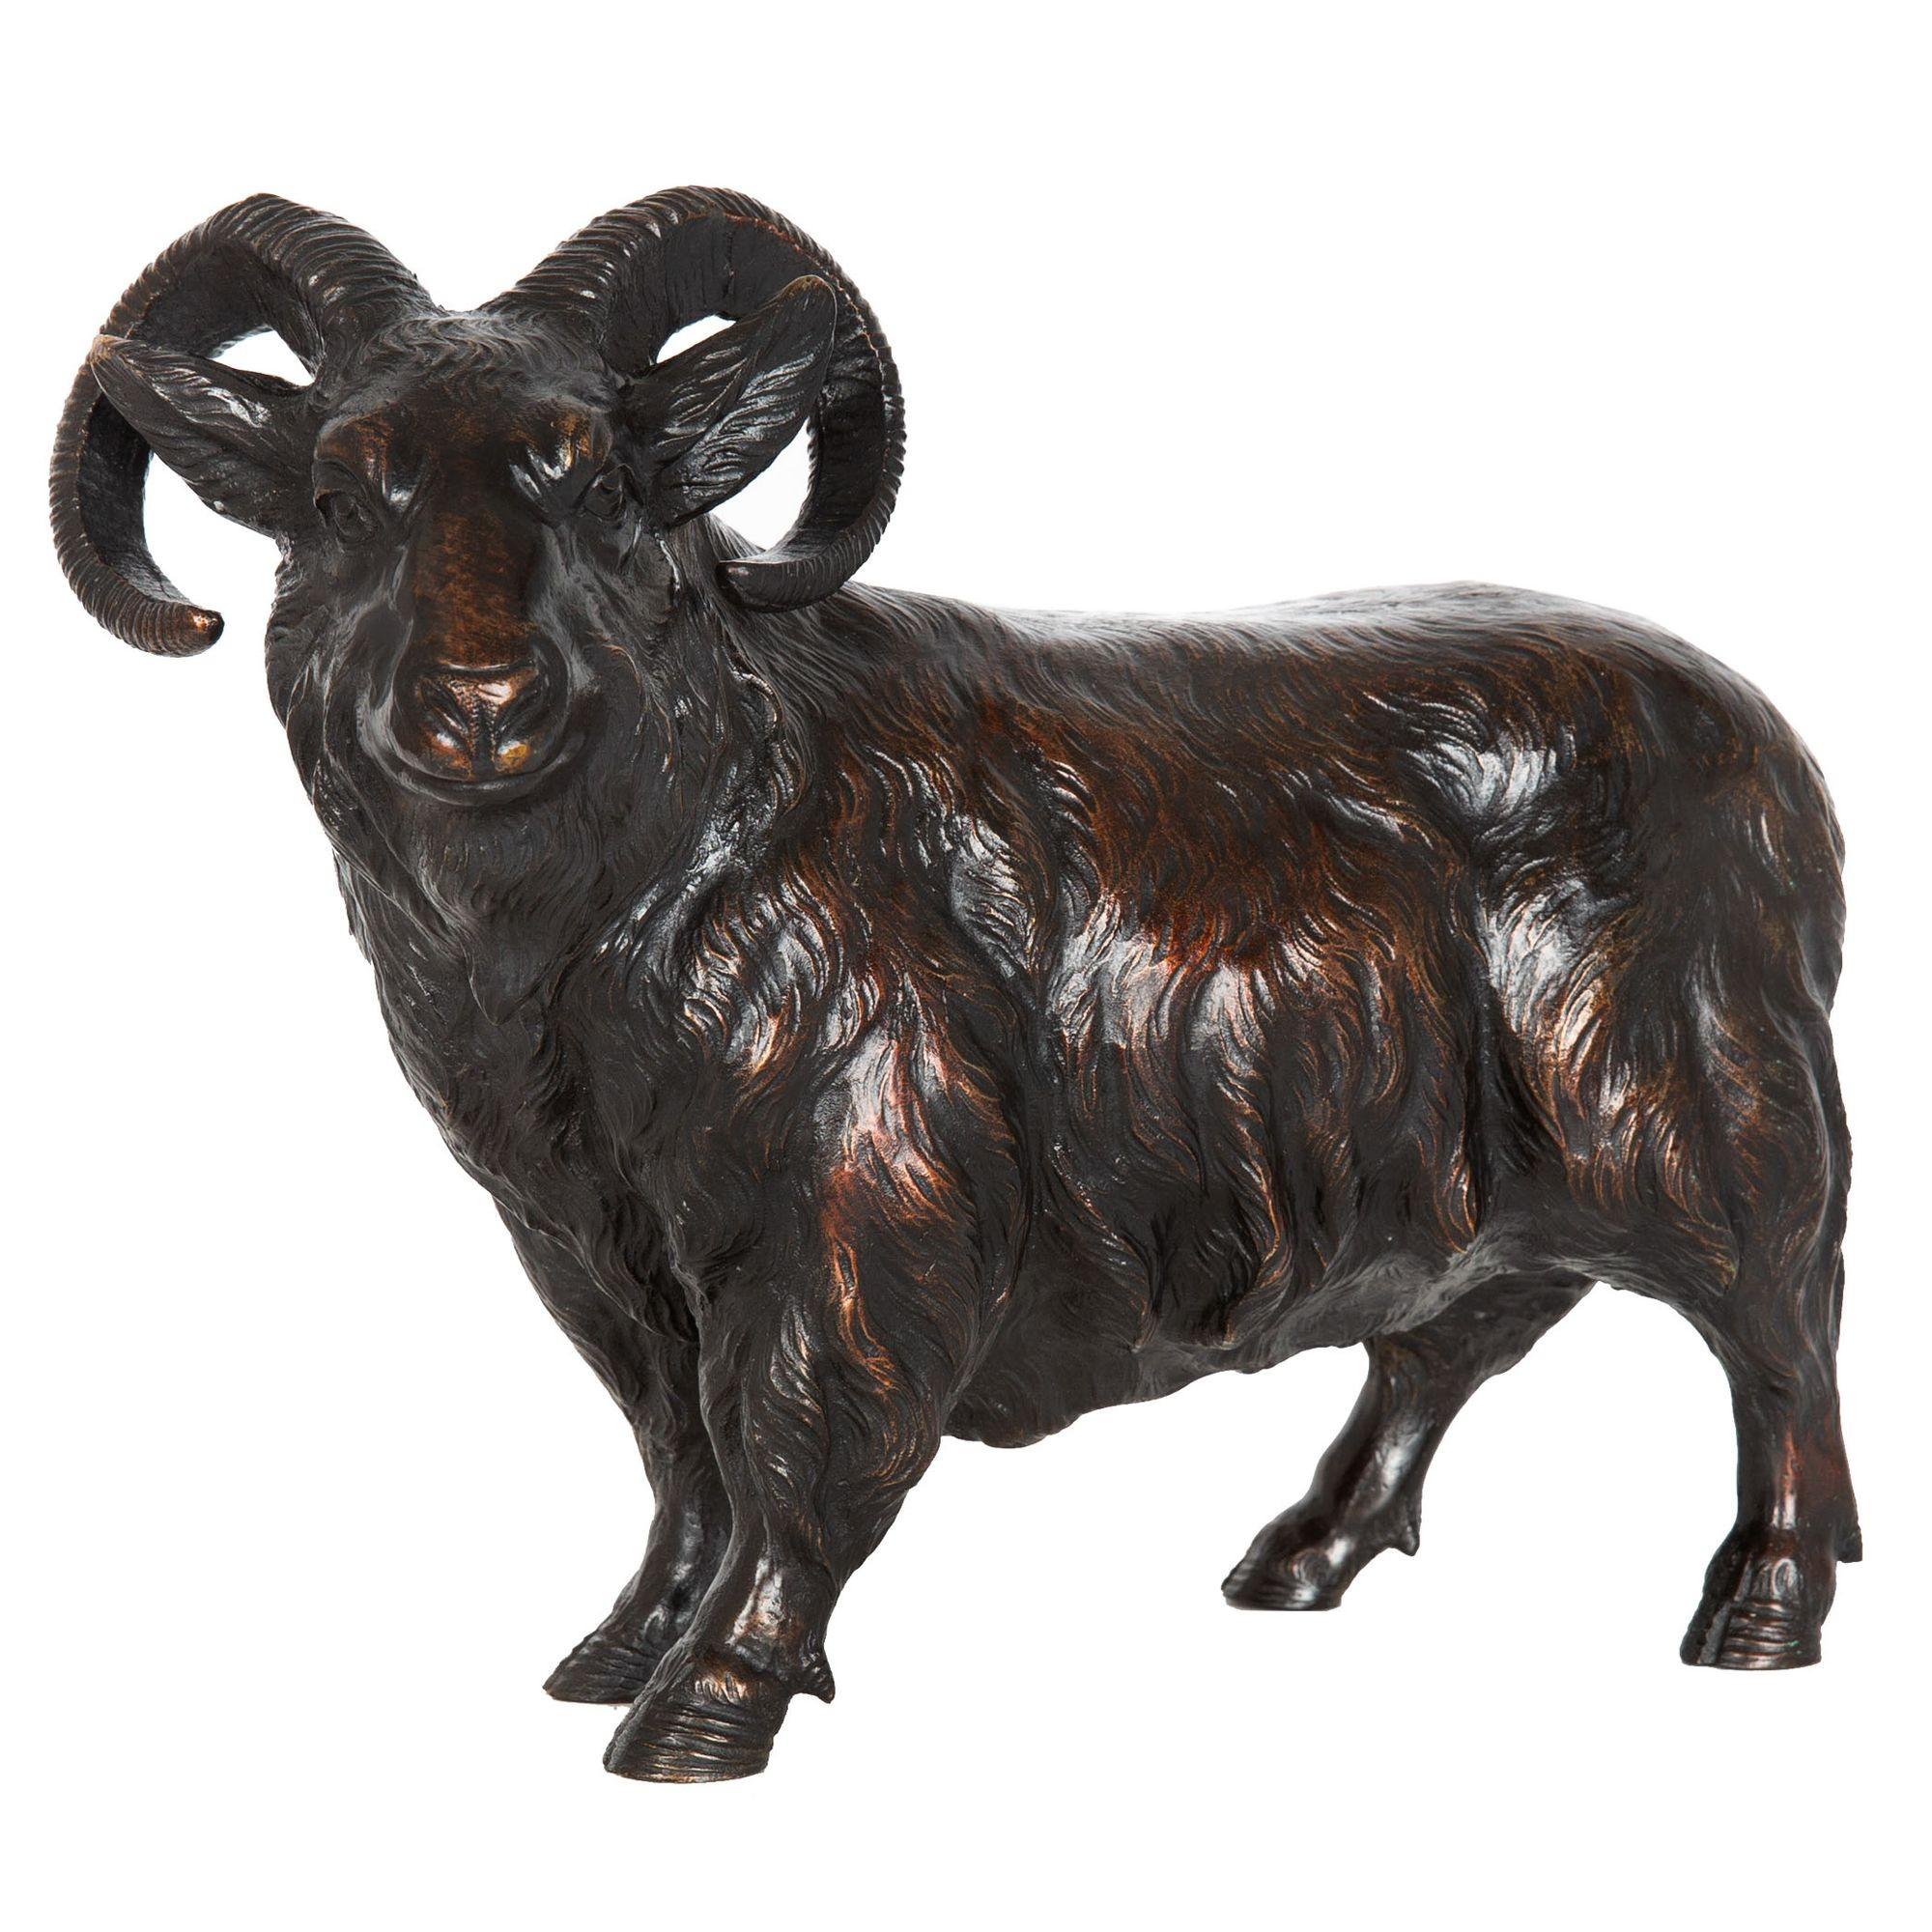 JAPANESE SCHOOL
Early 20th century

Okimono of a Standing Ram

Patinated bronze  signed illegibly to the underside

Item # 306VSG19P

A very finely chiseled Japanese okimono, this fine bronze sculpture of a Standing Ram showcases a high level of